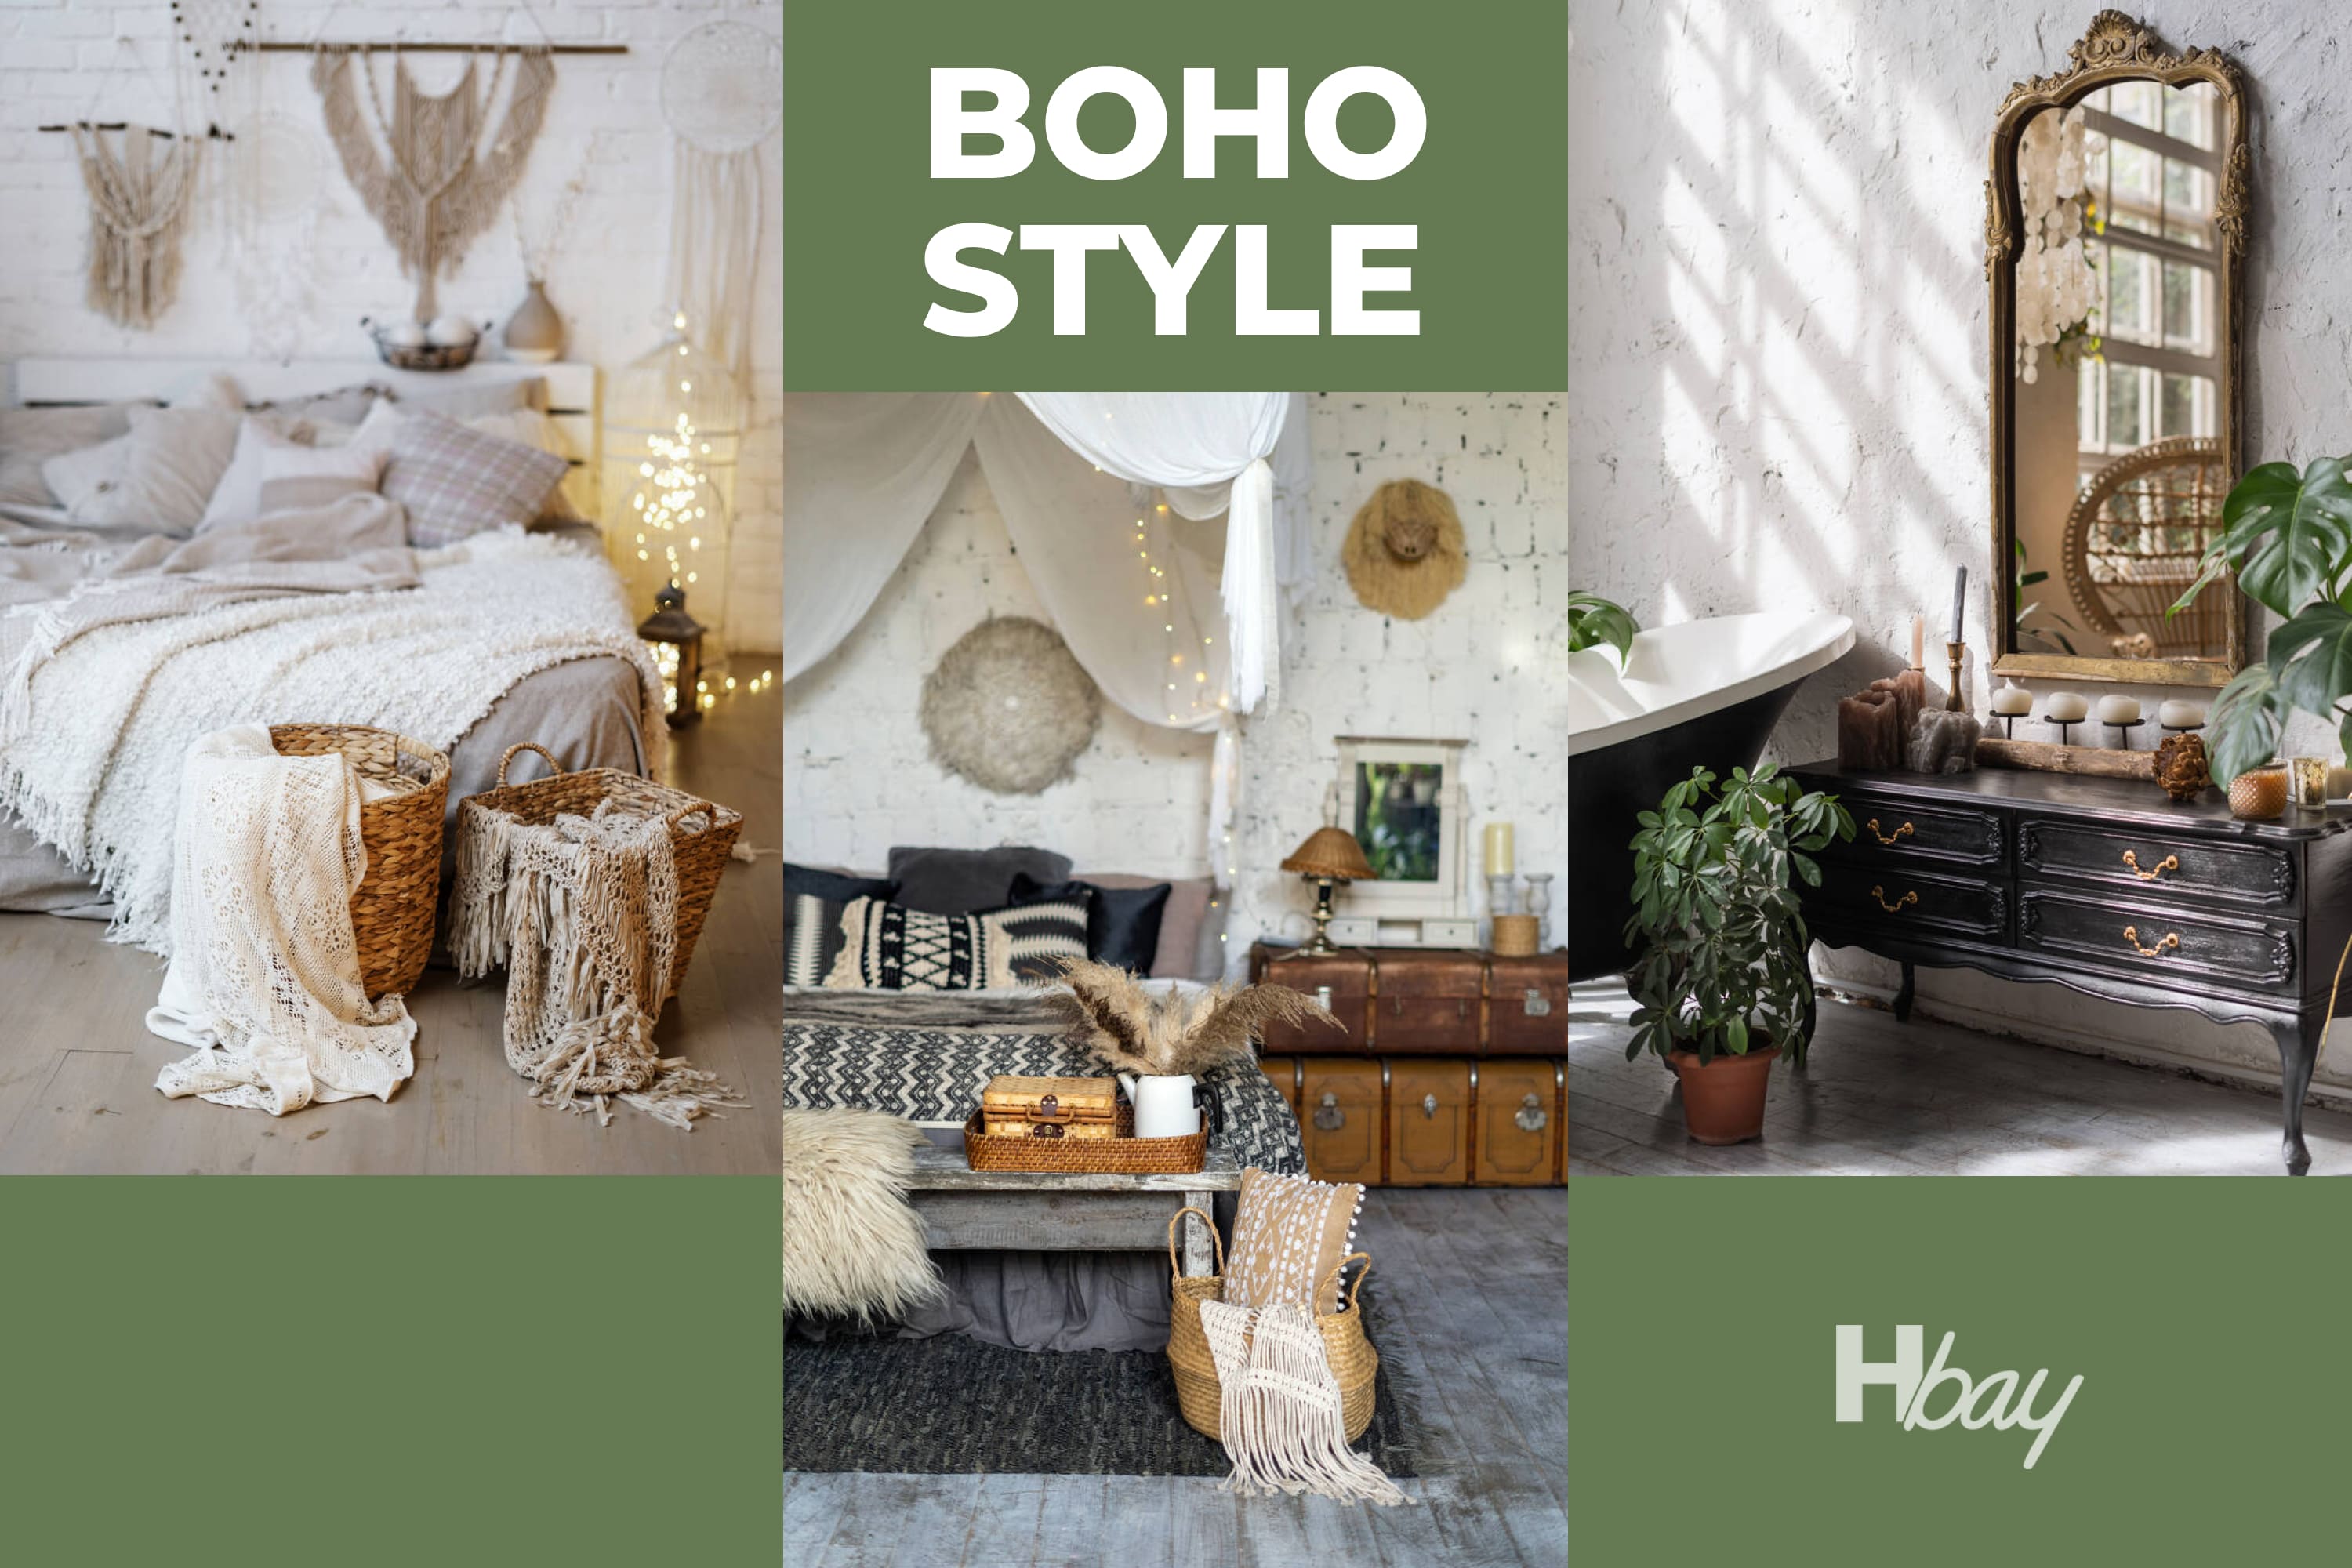 What is the Boho Decorative Style